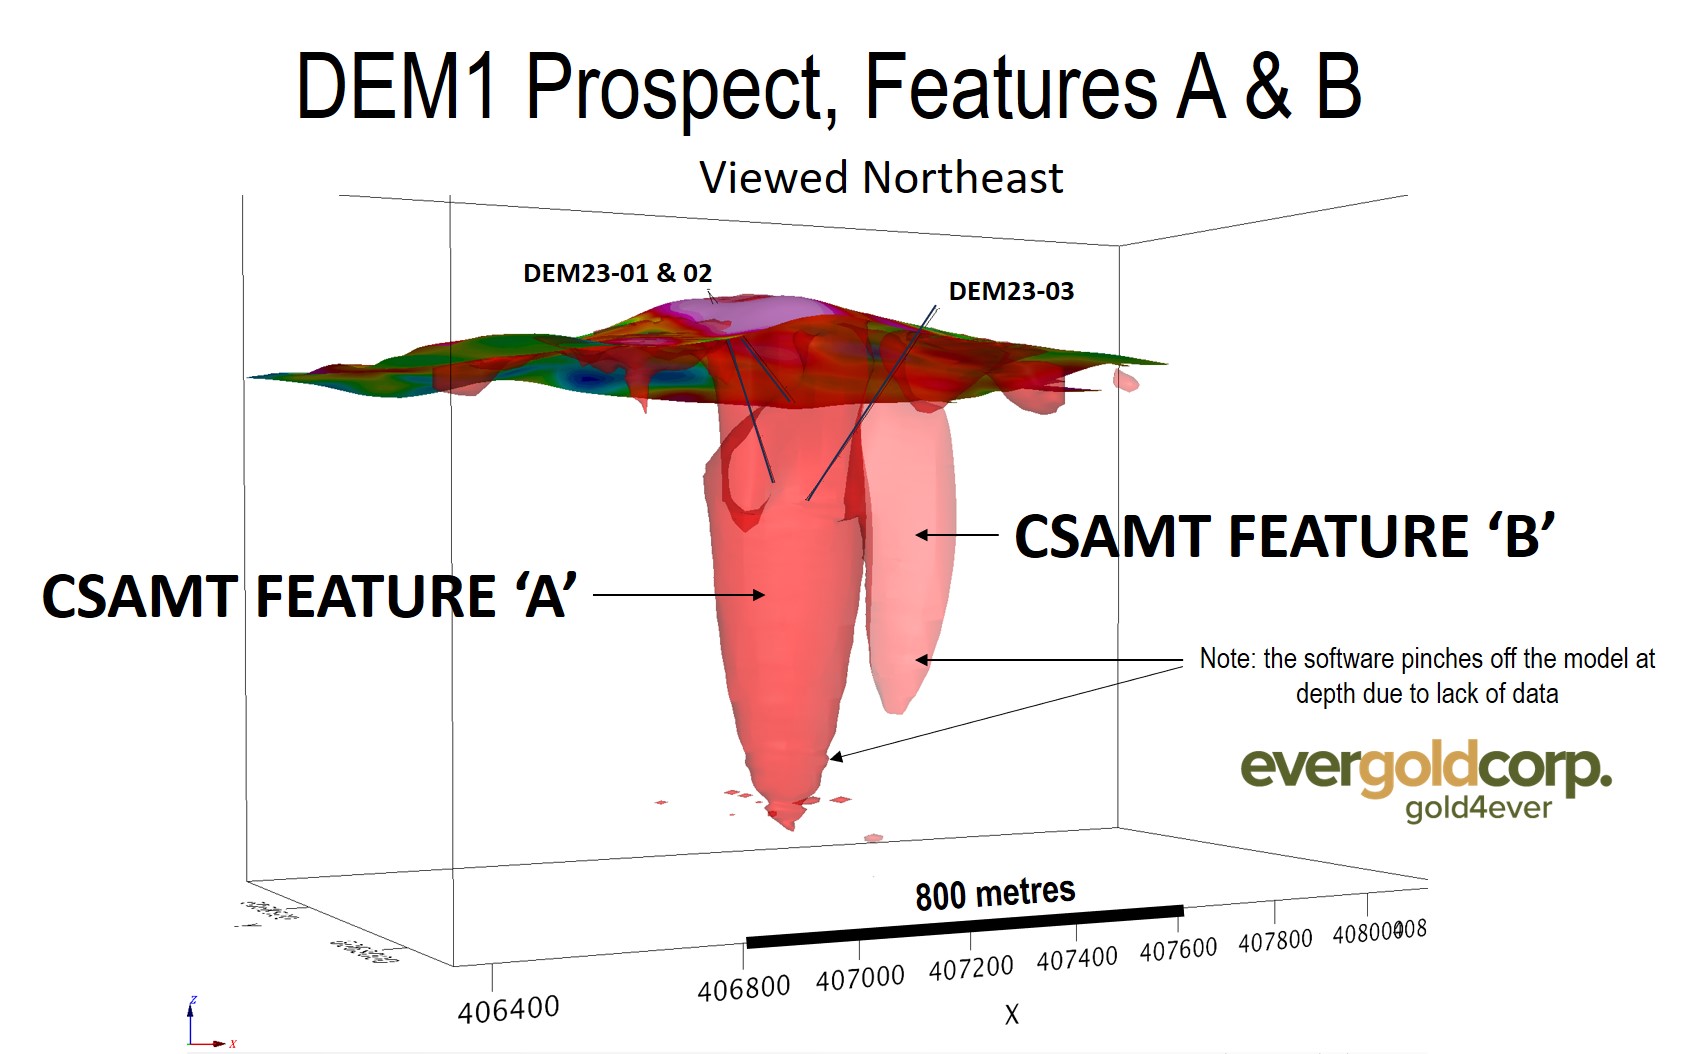 Figure 3 - DEM1 Prospect CSAMT Features A and B, Voxel Model